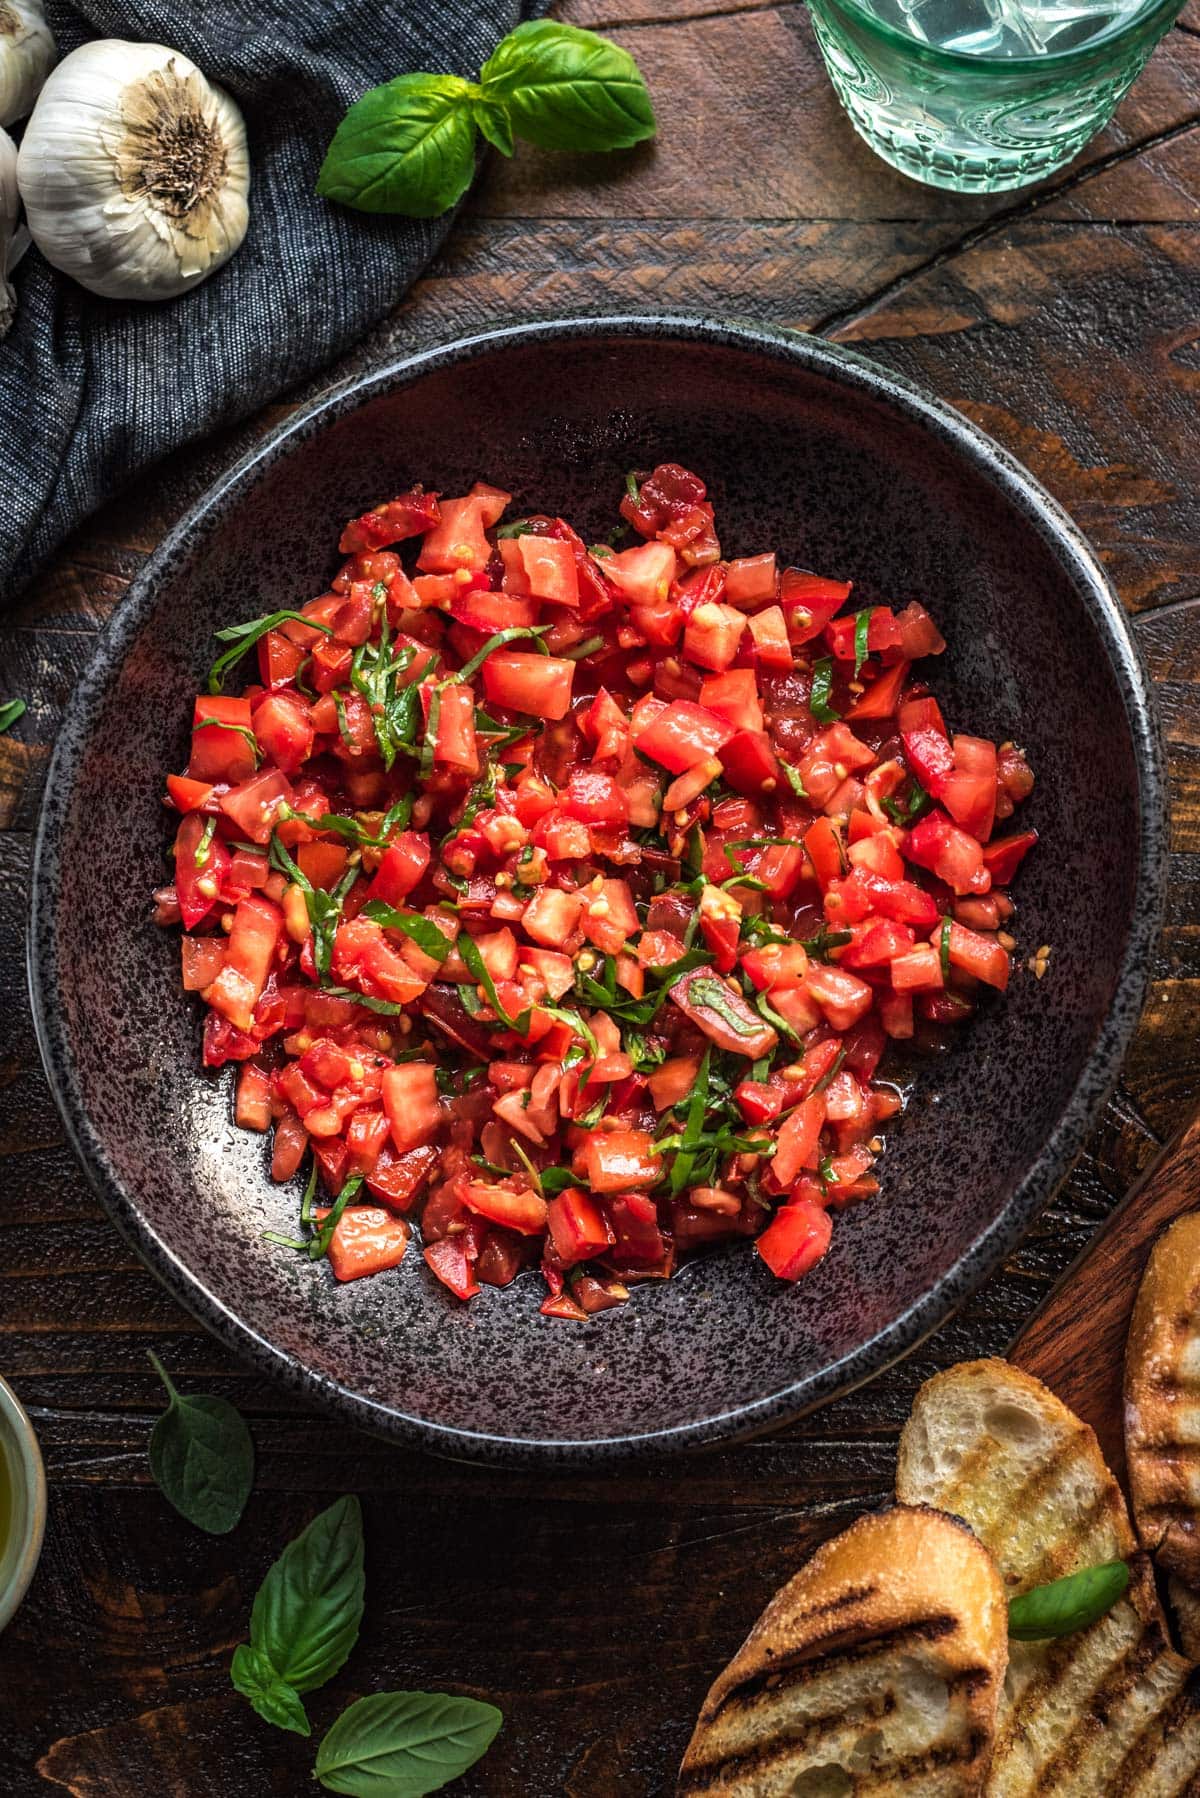 A large black bowl filled with a vibrant chopped tomato and basil mixture, with grilled bread on the side.